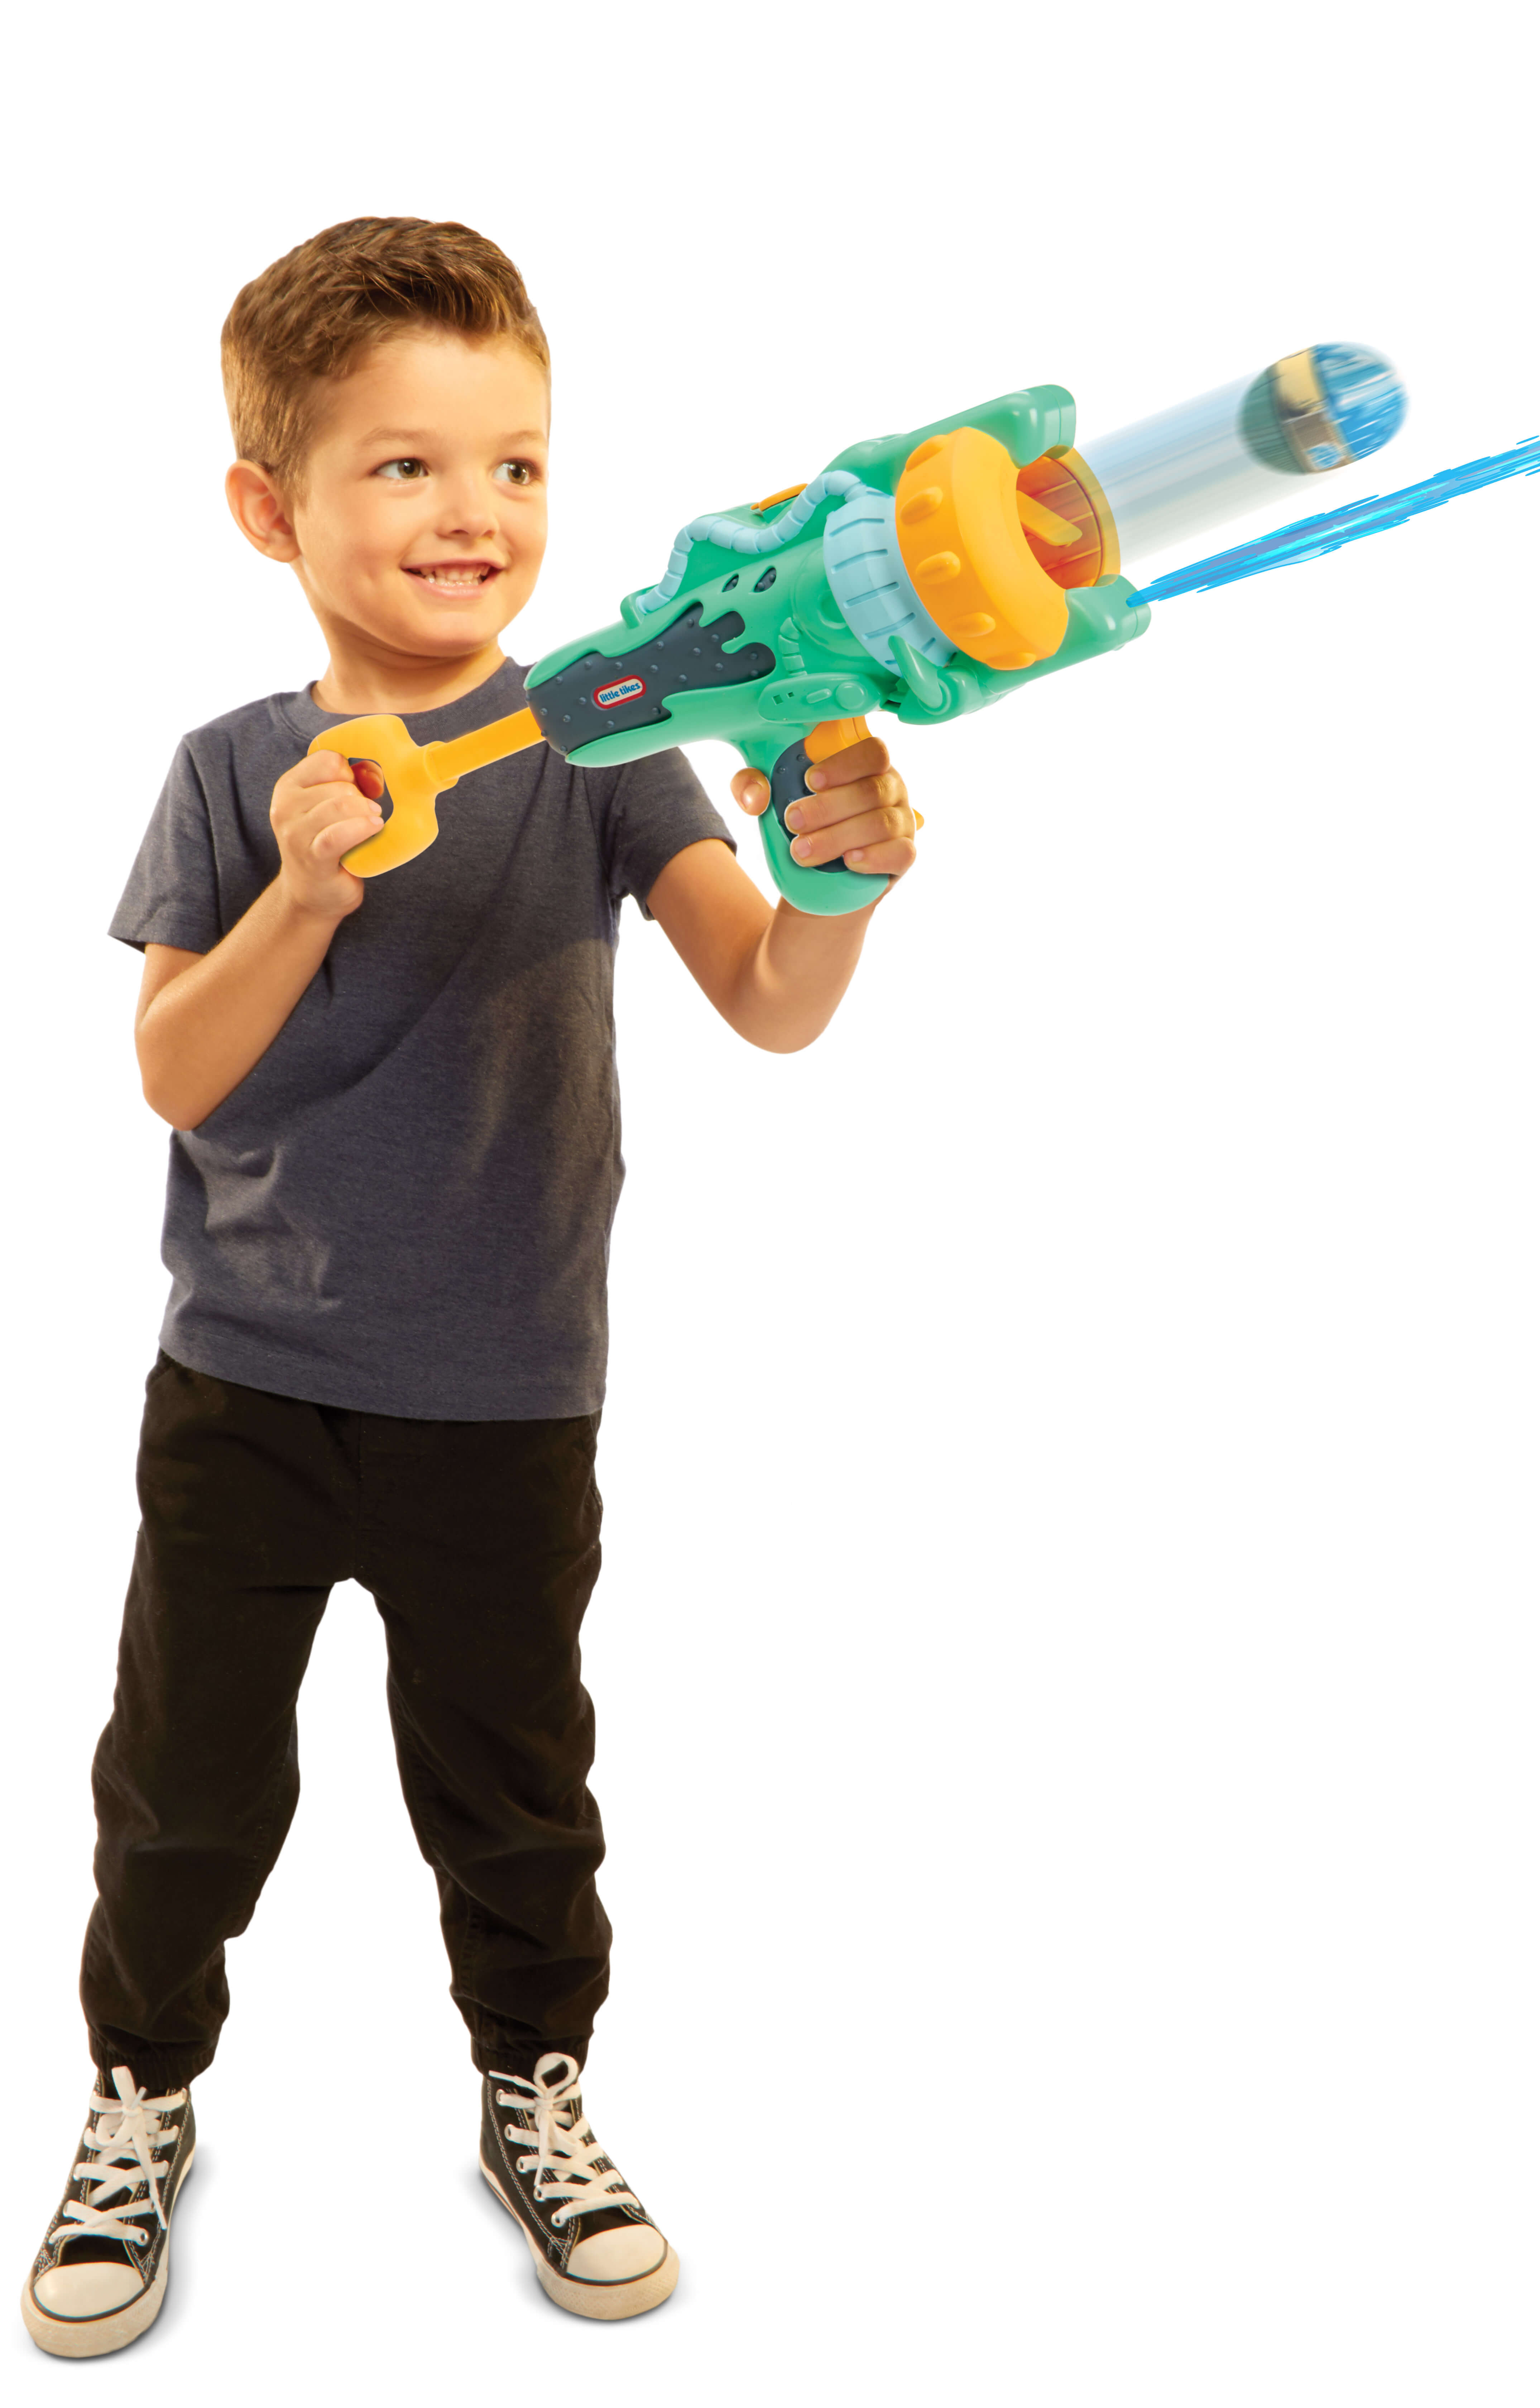 Little Tikes My First Mighty Blaster Spray Blaster, w/ 3 Power Pod Soft Pieces, 12' Range- Gift for Kids Toddlers Boys Girls Ages 3 4 5+ Year Old - image 3 of 7